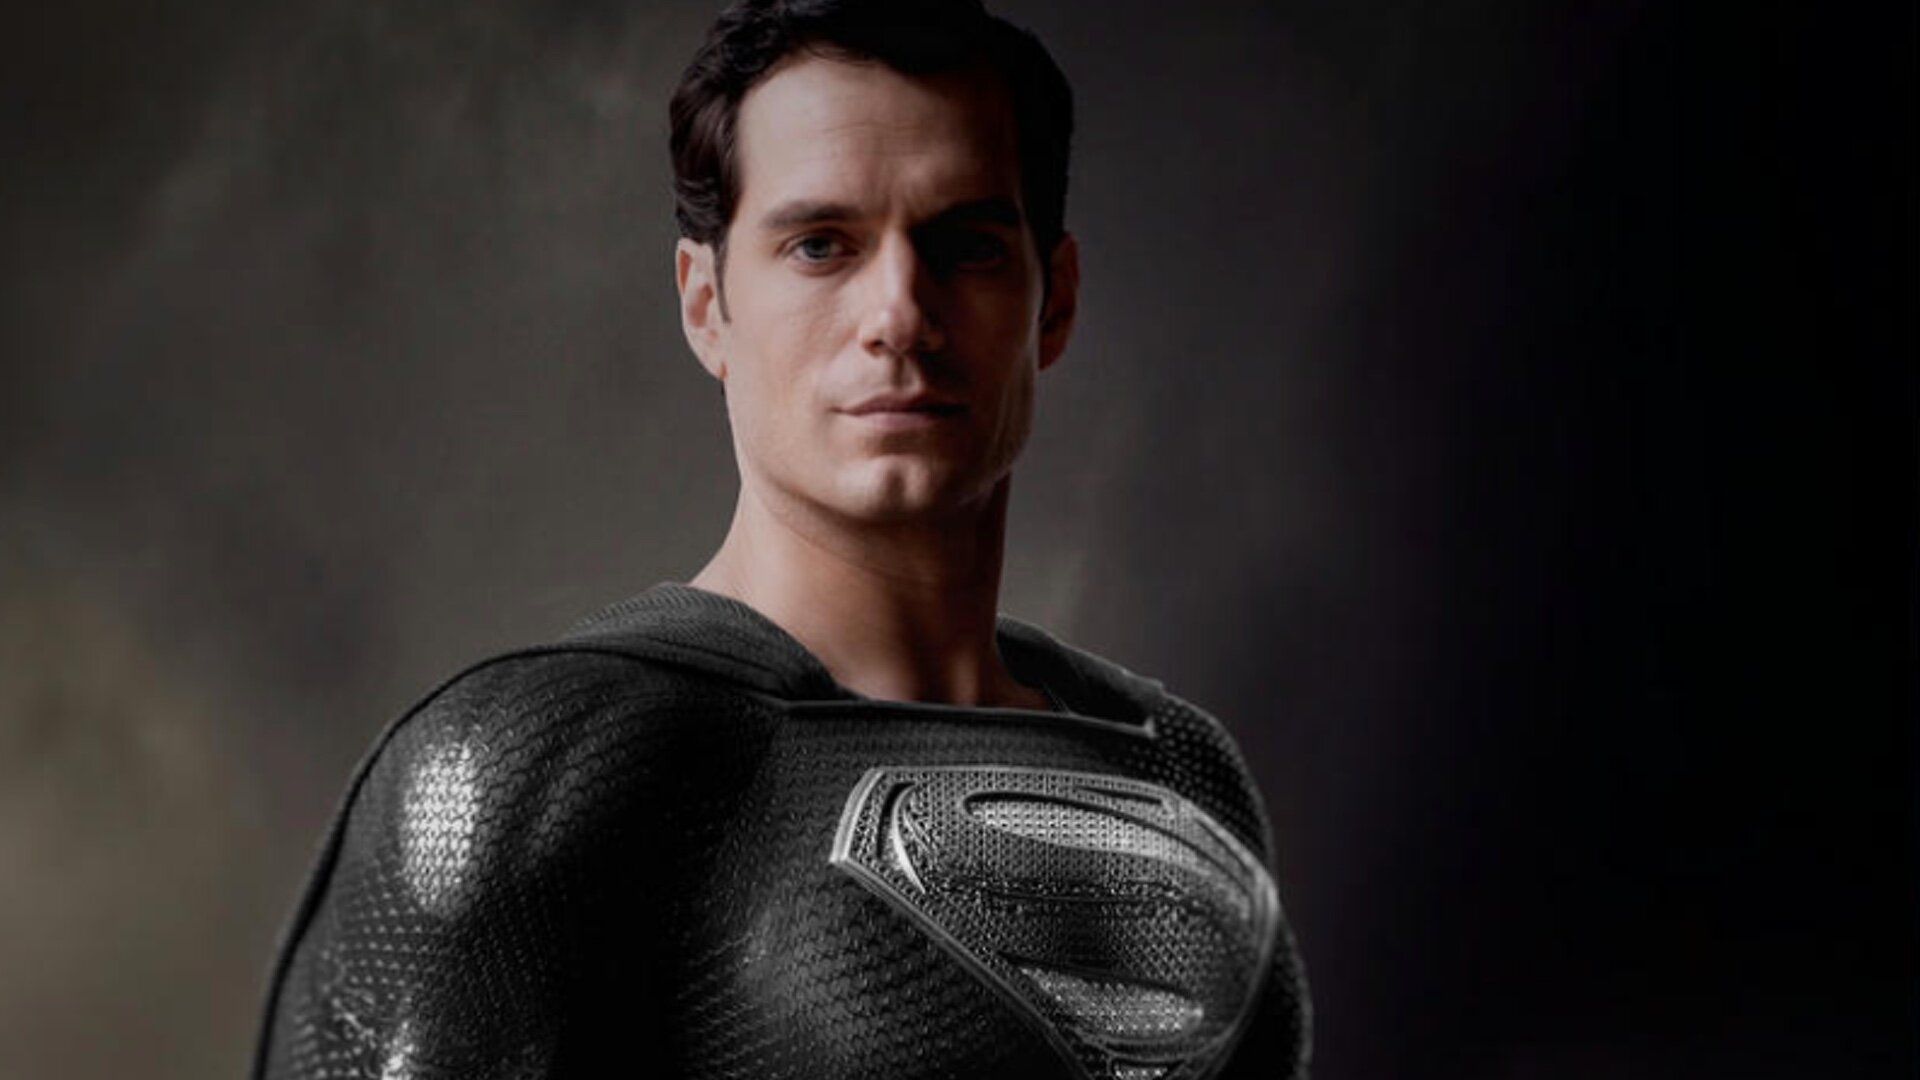 Zack Snyder Shares a Photo of Henry Cavill Wearing The Black Superman Suit in JUSTICE LEAGUE